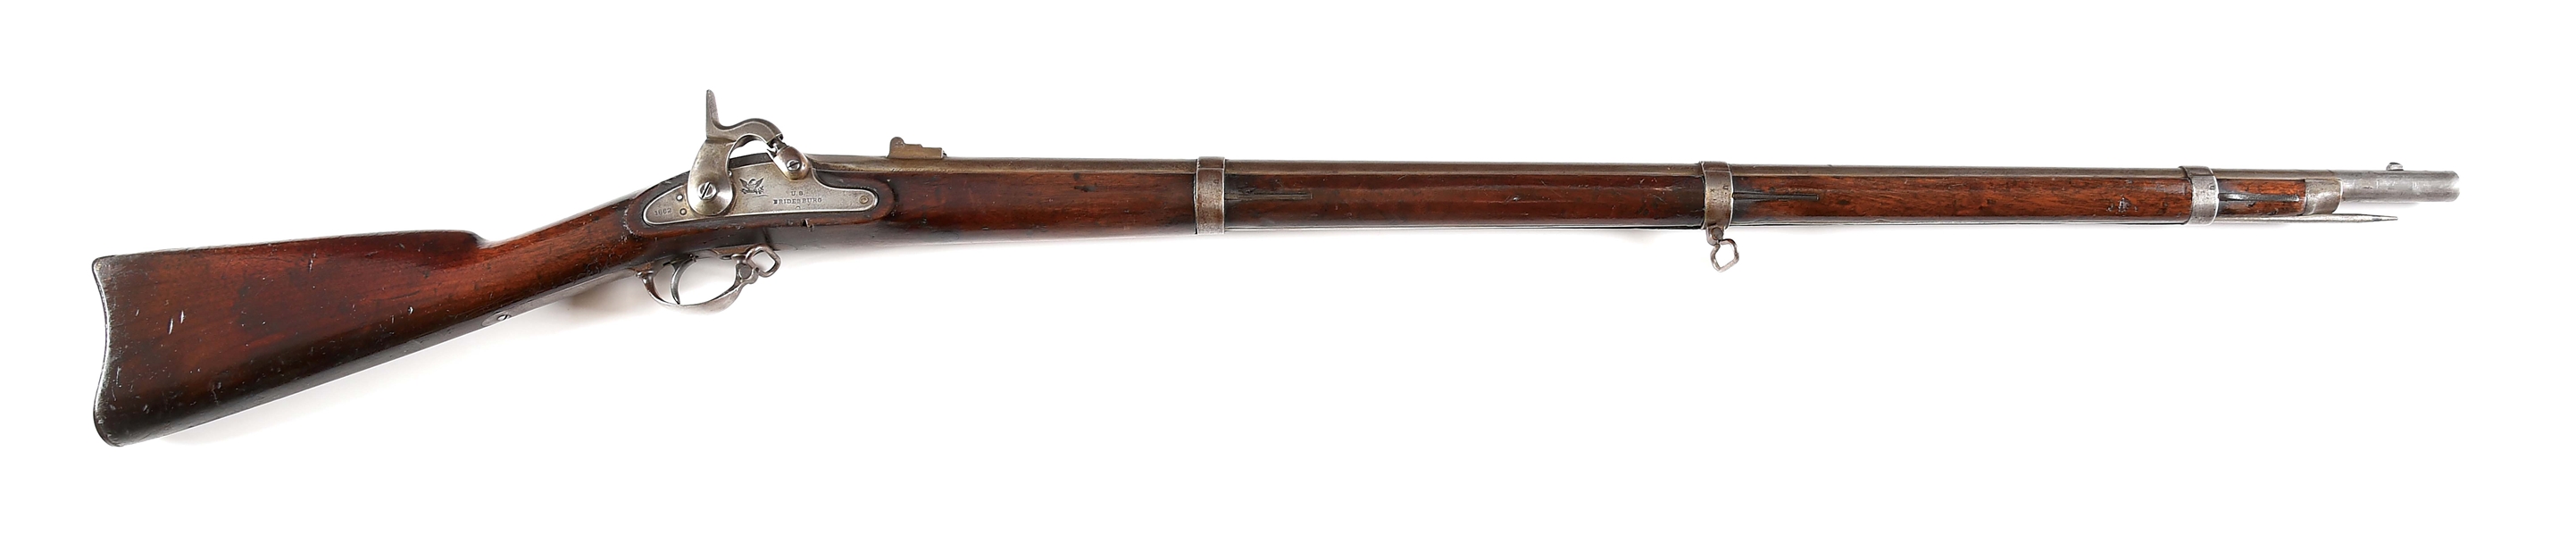 (A) BRIDESBURG MODEL 1861 RIFLED MUSKET DATED 1862.